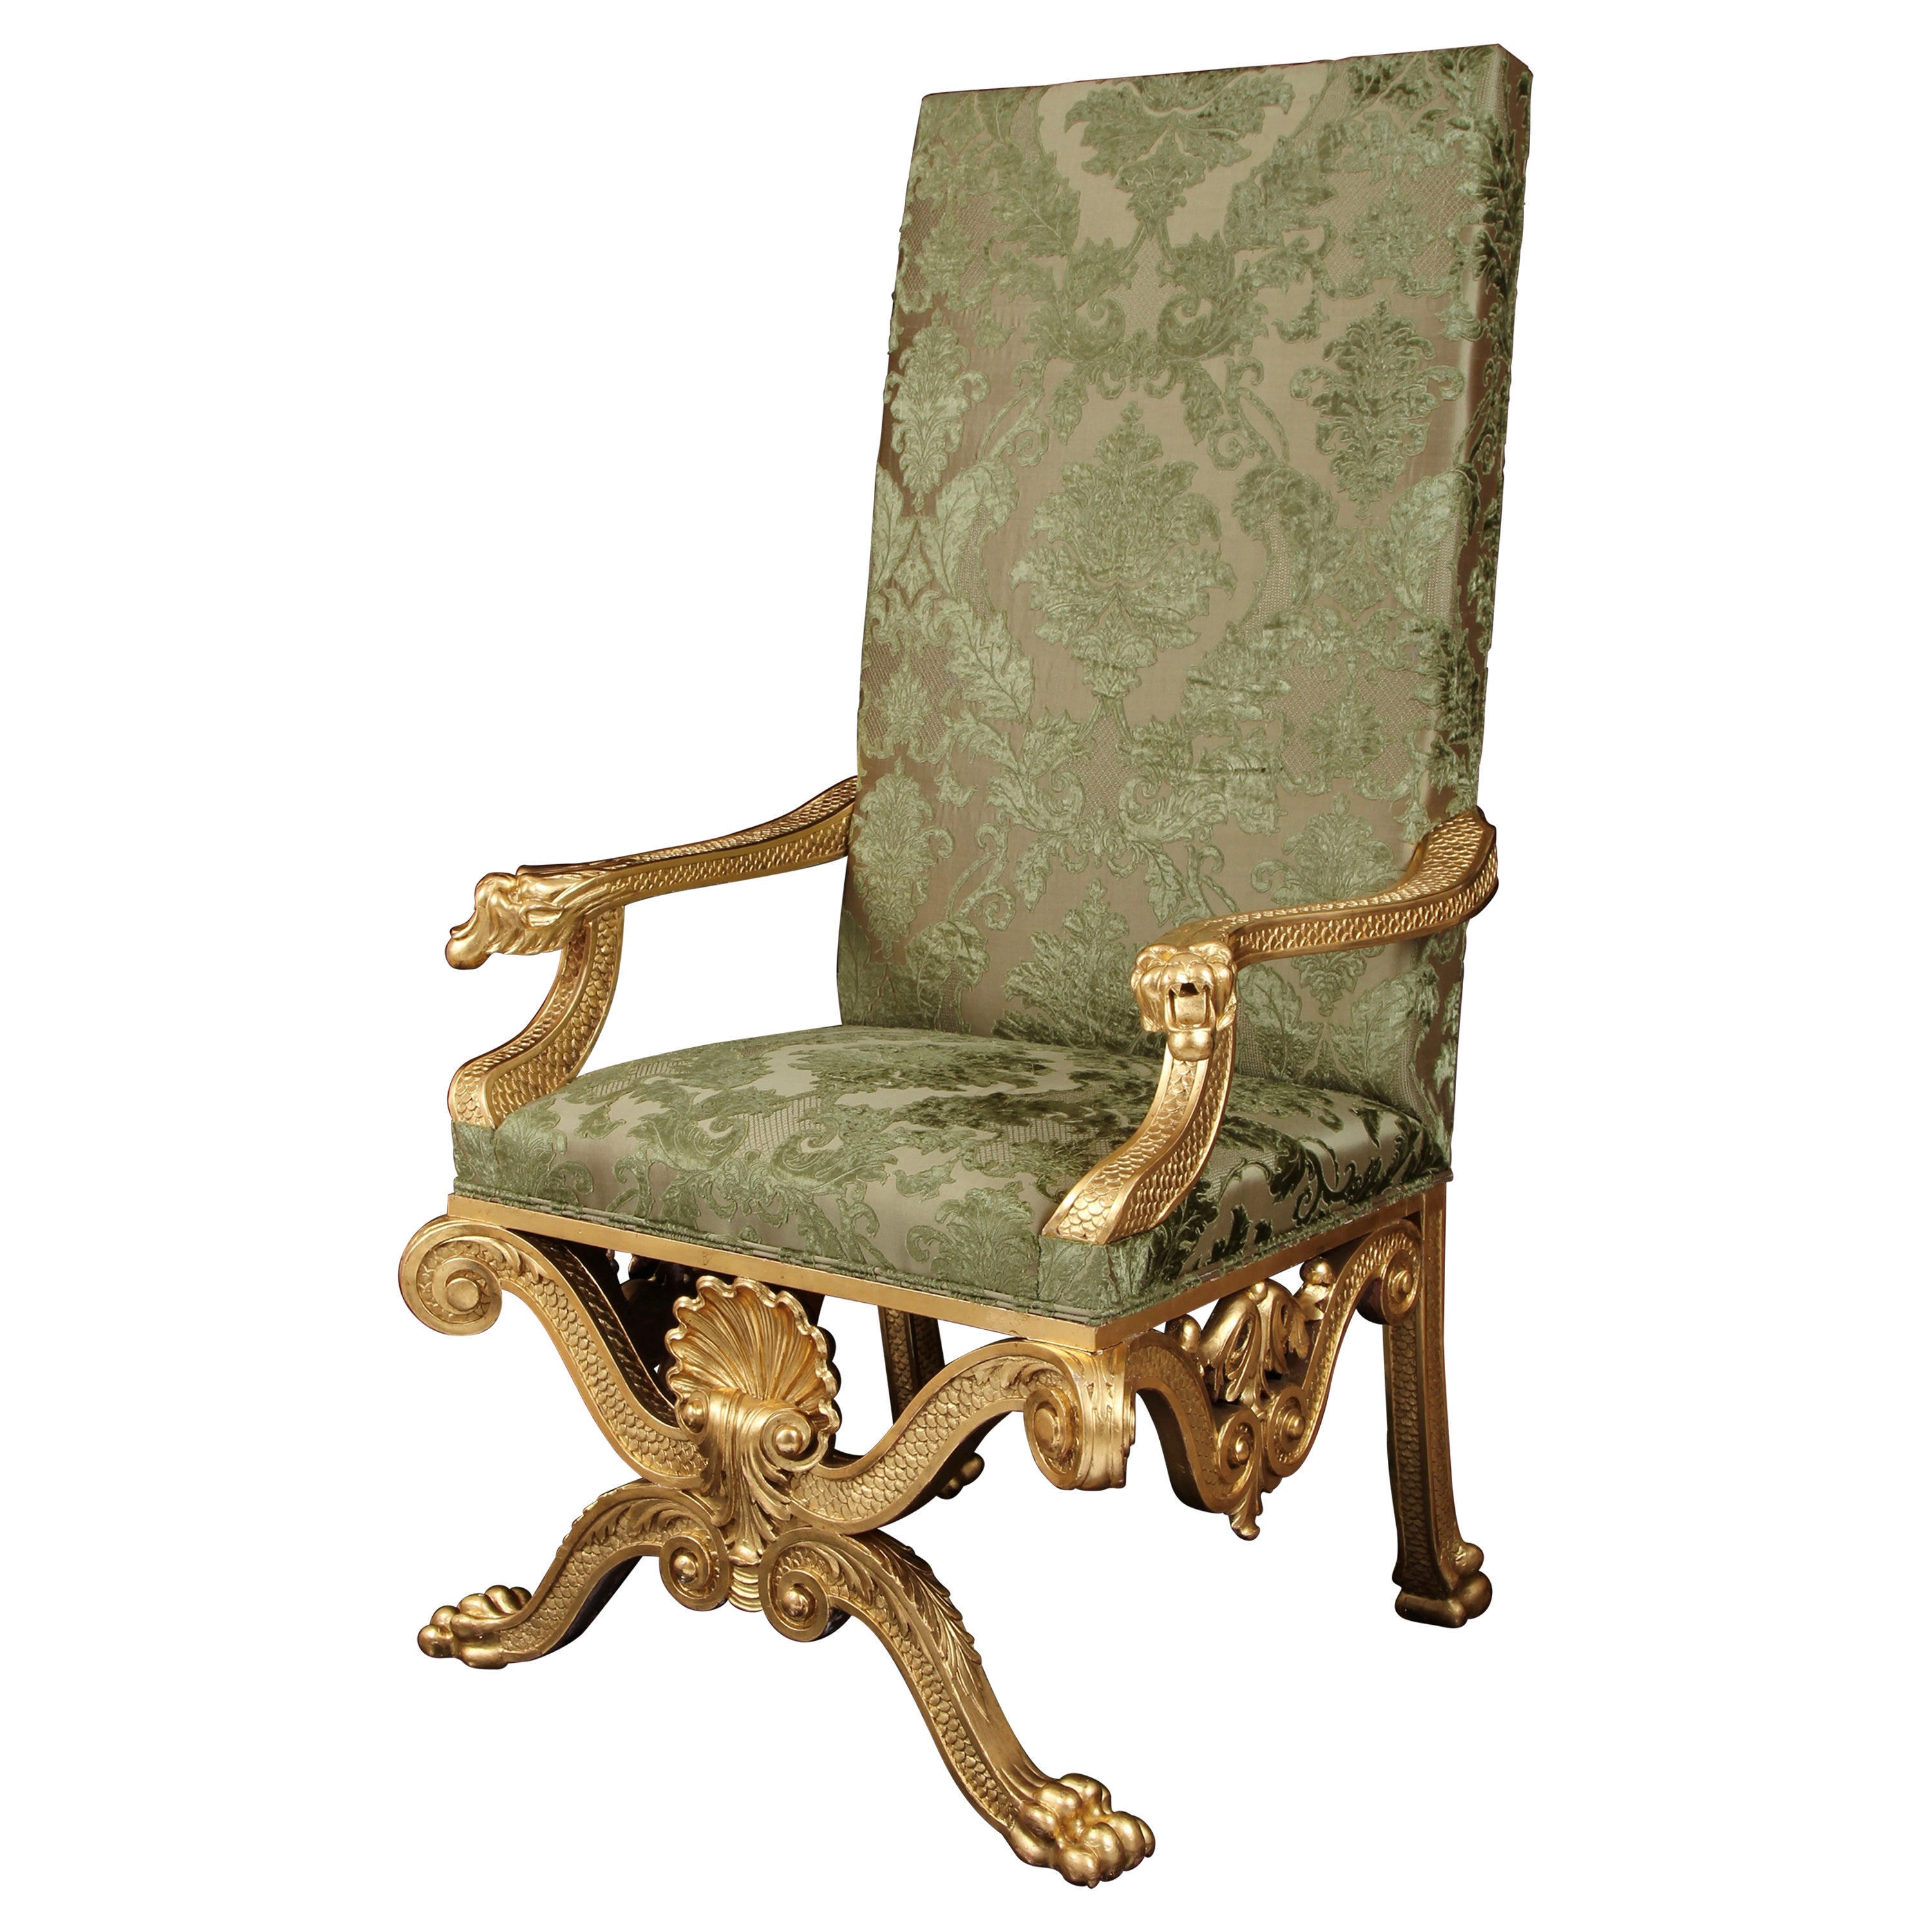 19th Century Giltwood Throne Armchair, design attributed to William Kent